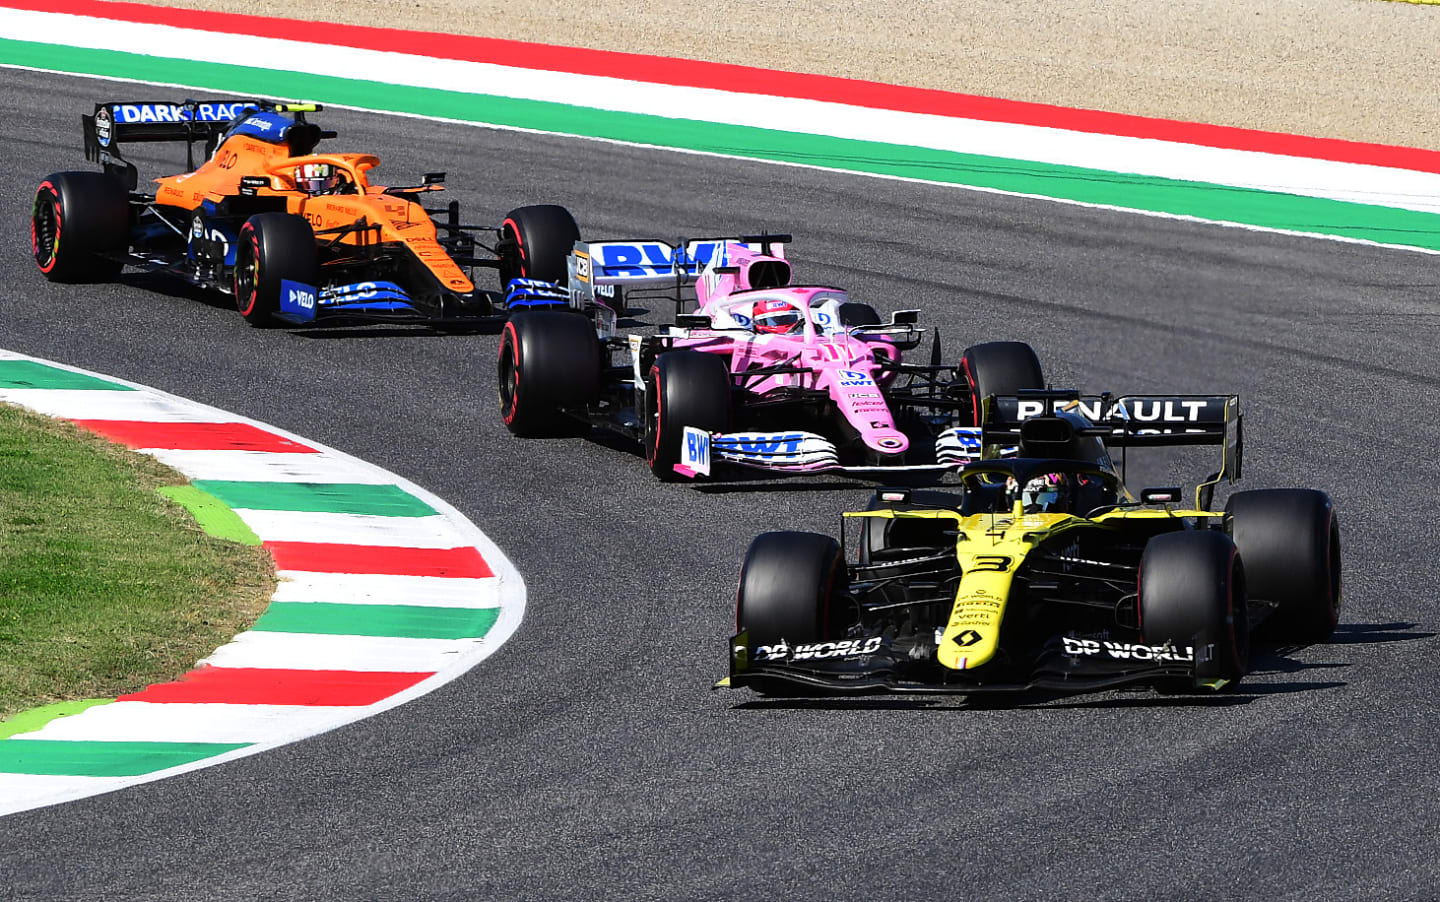 SCARPERIA, ITALY - SEPTEMBER 13: Daniel Ricciardo of Australia driving the (3) Renault Sport Formula One Team RS20 leads Sergio Perez of Mexico driving the (11) Racing Point RP20 Mercedes and Lando Norris of Great Britain driving the (4) McLaren F1 Team MCL35 Renault during the F1 Grand Prix of Tuscany at Mugello Circuit on September 13, 2020 in Scarperia, Italy. (Photo by Jenifer Lorenzini - Pool/Getty Images)